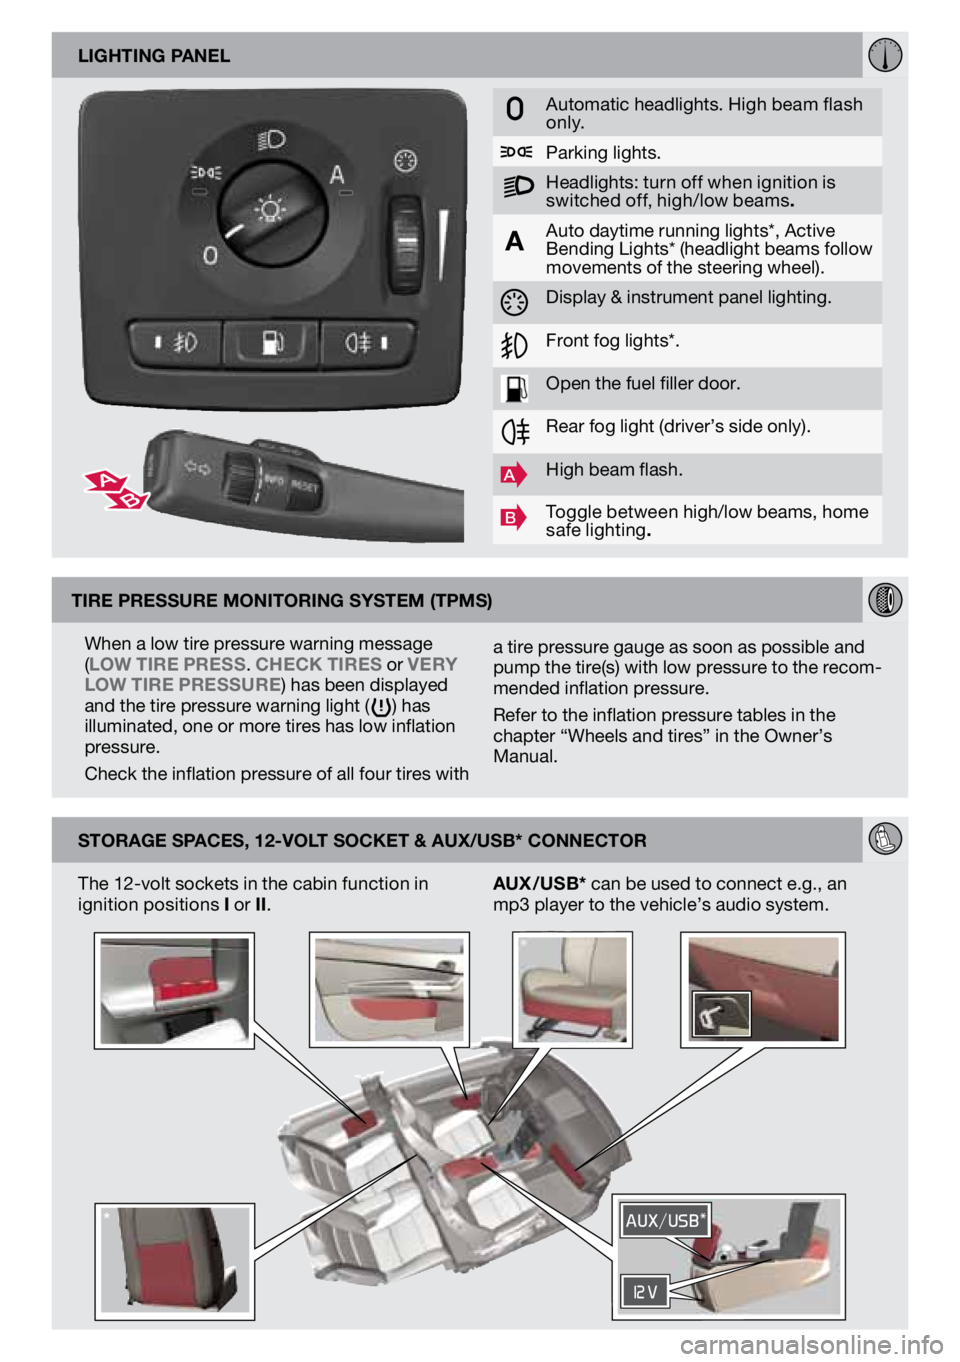 VOLVO C30 2013  Quick Guide lIghtIng panel
tIre pressure monItorIng system (tpms) storage spaces, 12-volt socket & auX/usb* connector auX /usb * can be used to connect e.g., an 
mp3 player to the vehicle’s audio system.
The 
1